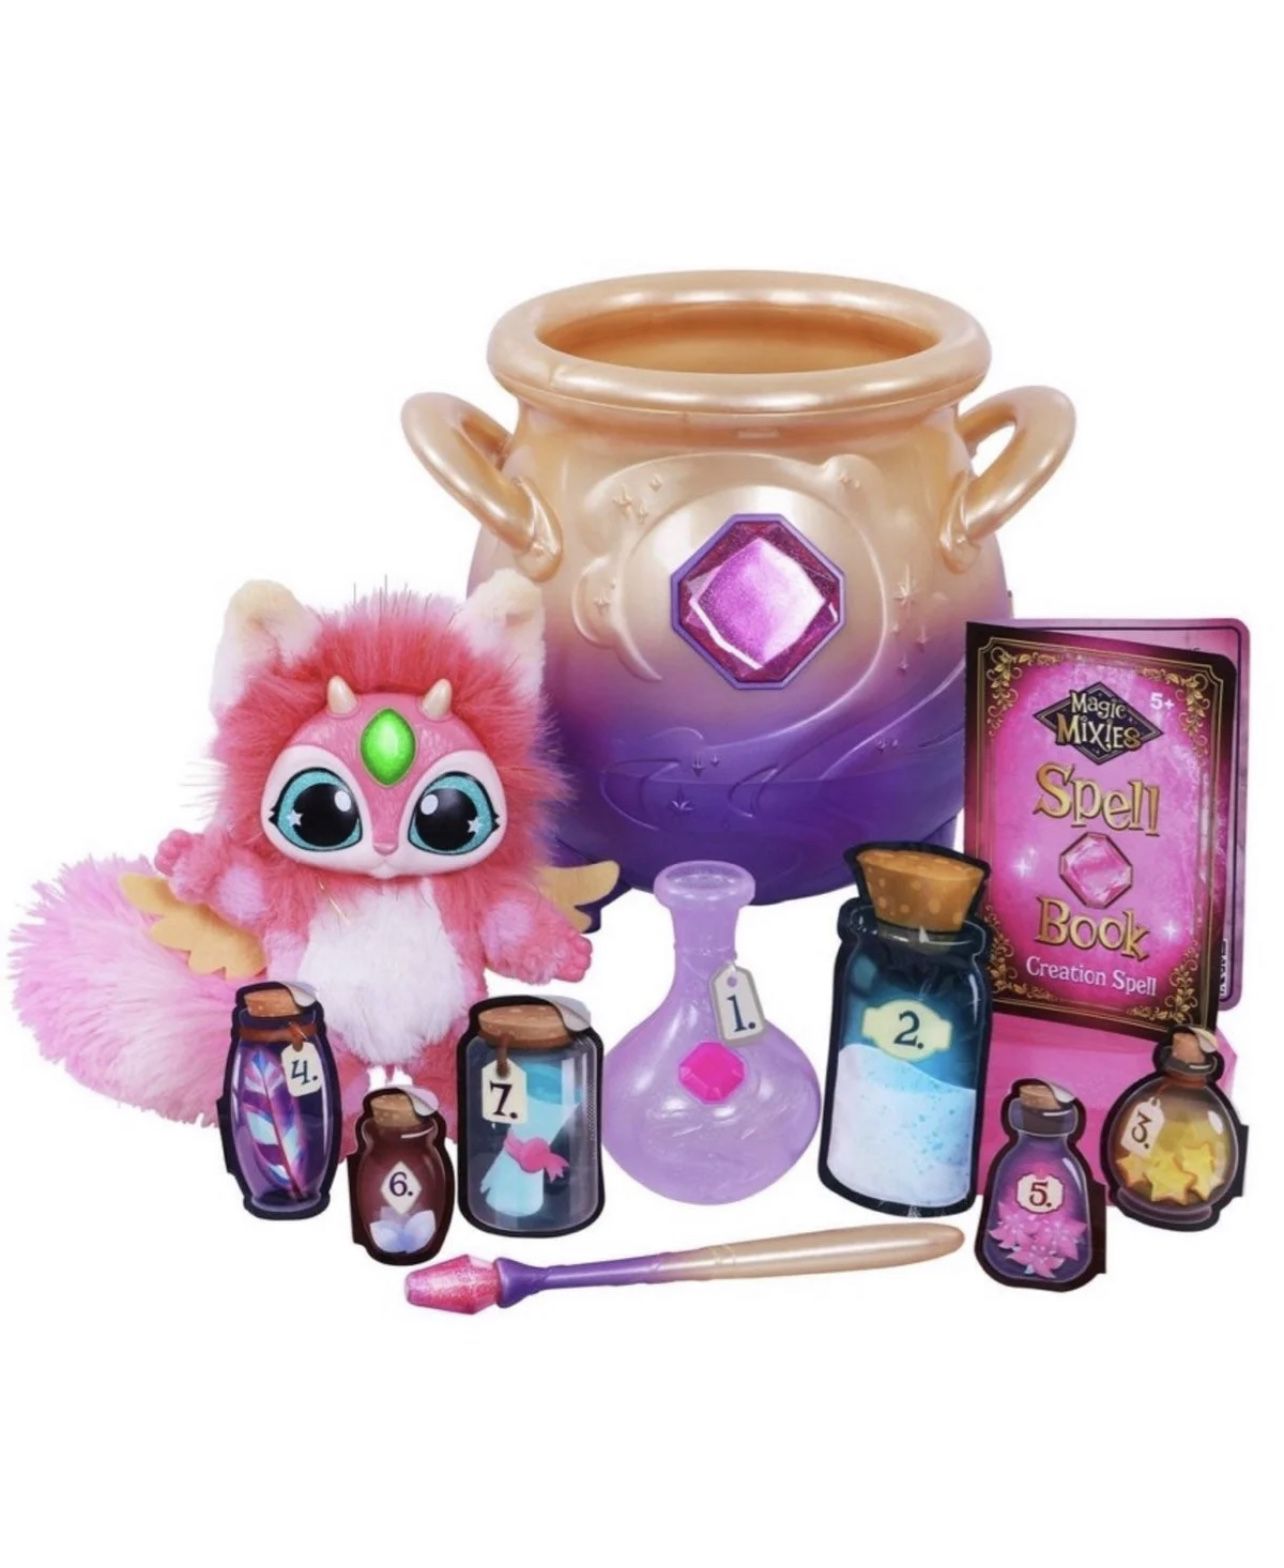 Magic Mixies Magical Misting Cauldron with Interactive 8" Pink Plush Toy - New!